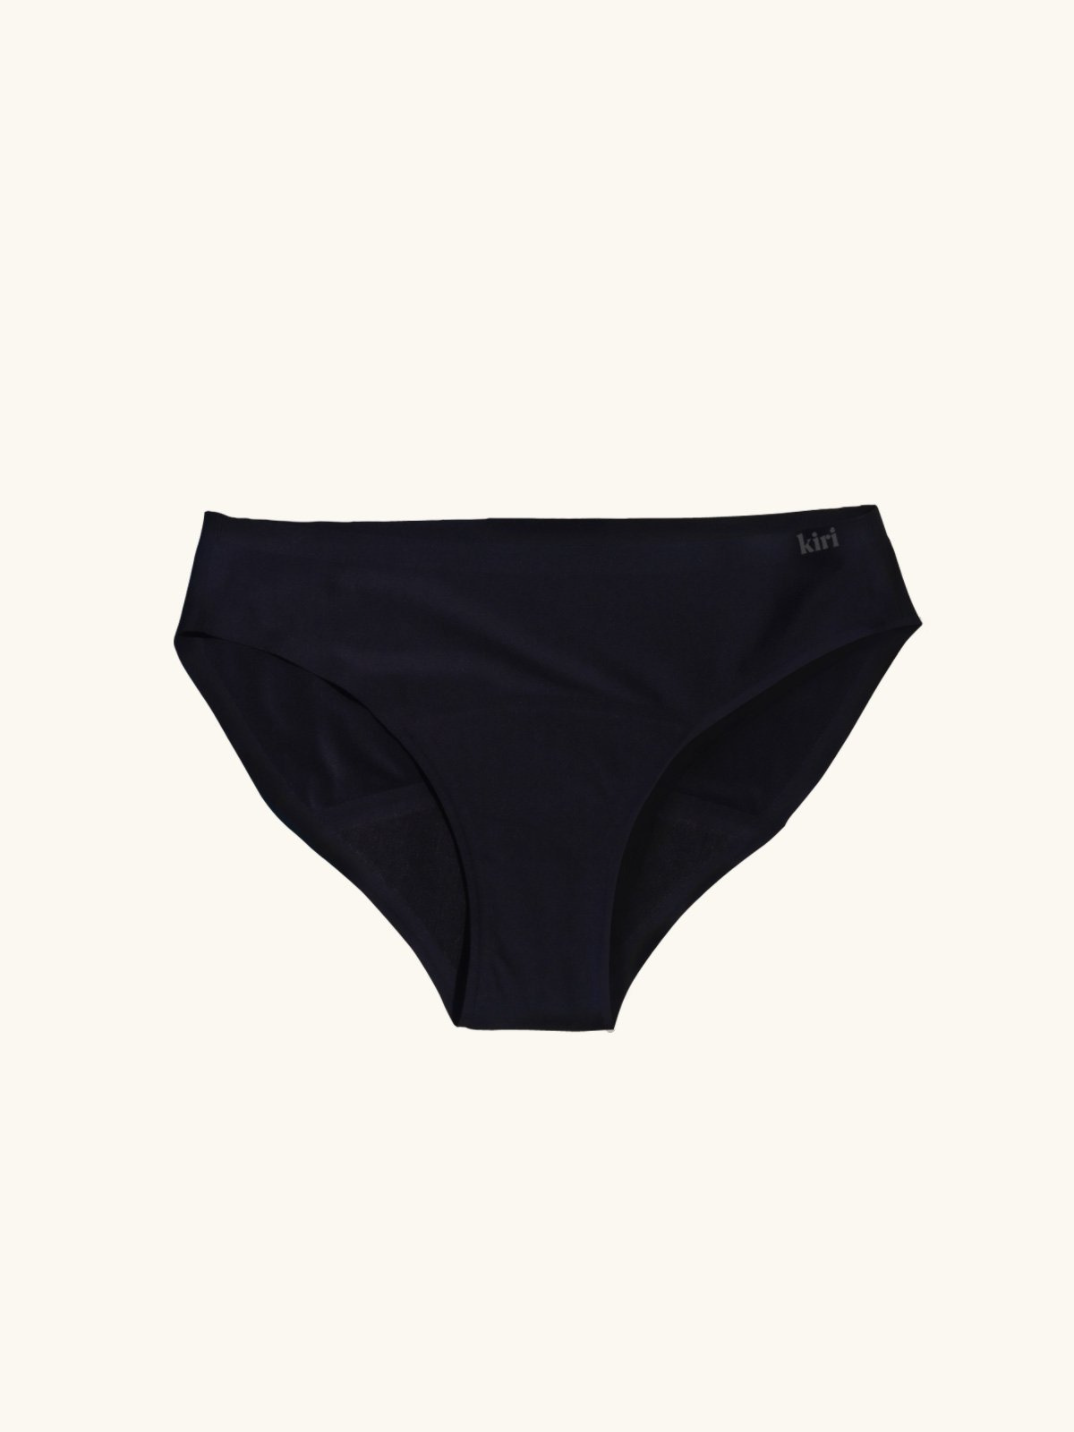 Introducing the Nisha Black Classic Bikini-Style Panties. Women deserve sustainable and reliable period care. From first periods to the occasional leakage - kiri ™ period panties will address them all. Our panties can be used and reused.